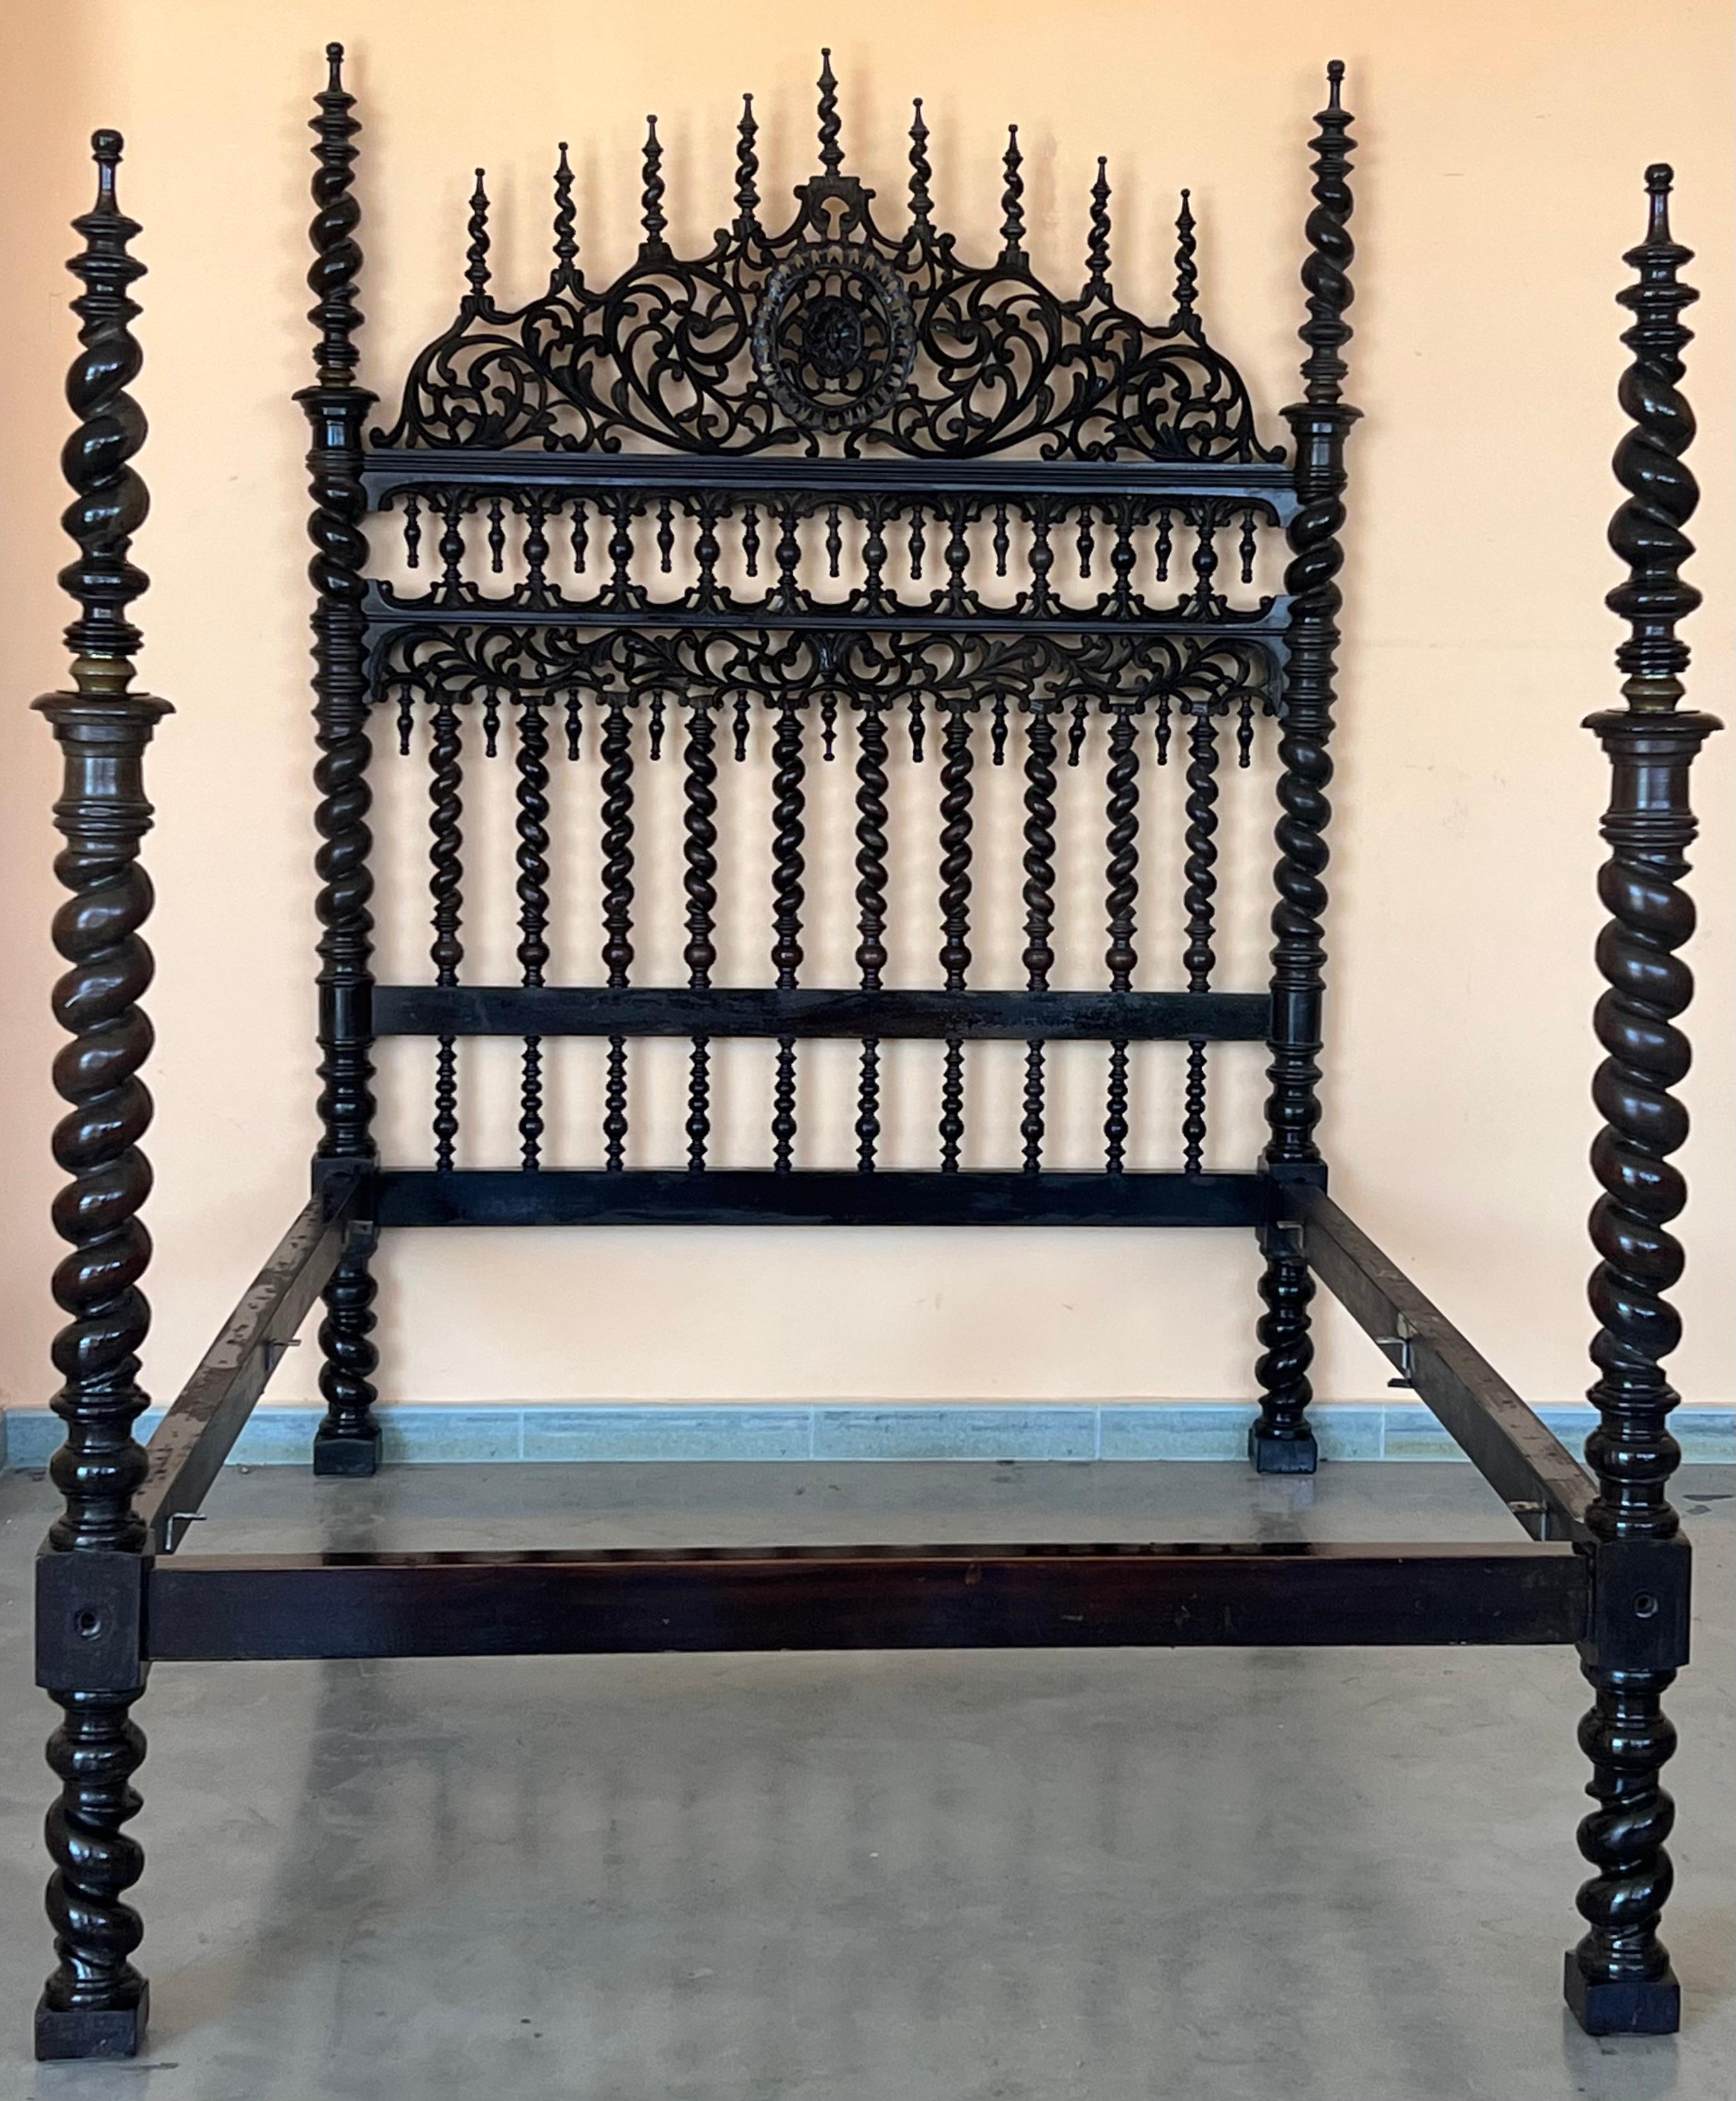 18th century Baroque bed, original Lisbon bed
A Portuguese bed of carved and turned walnut with 17th century elements, the headboard profusely mounted with spiral-twist spindles and the footboard between two boldly turned posts that include